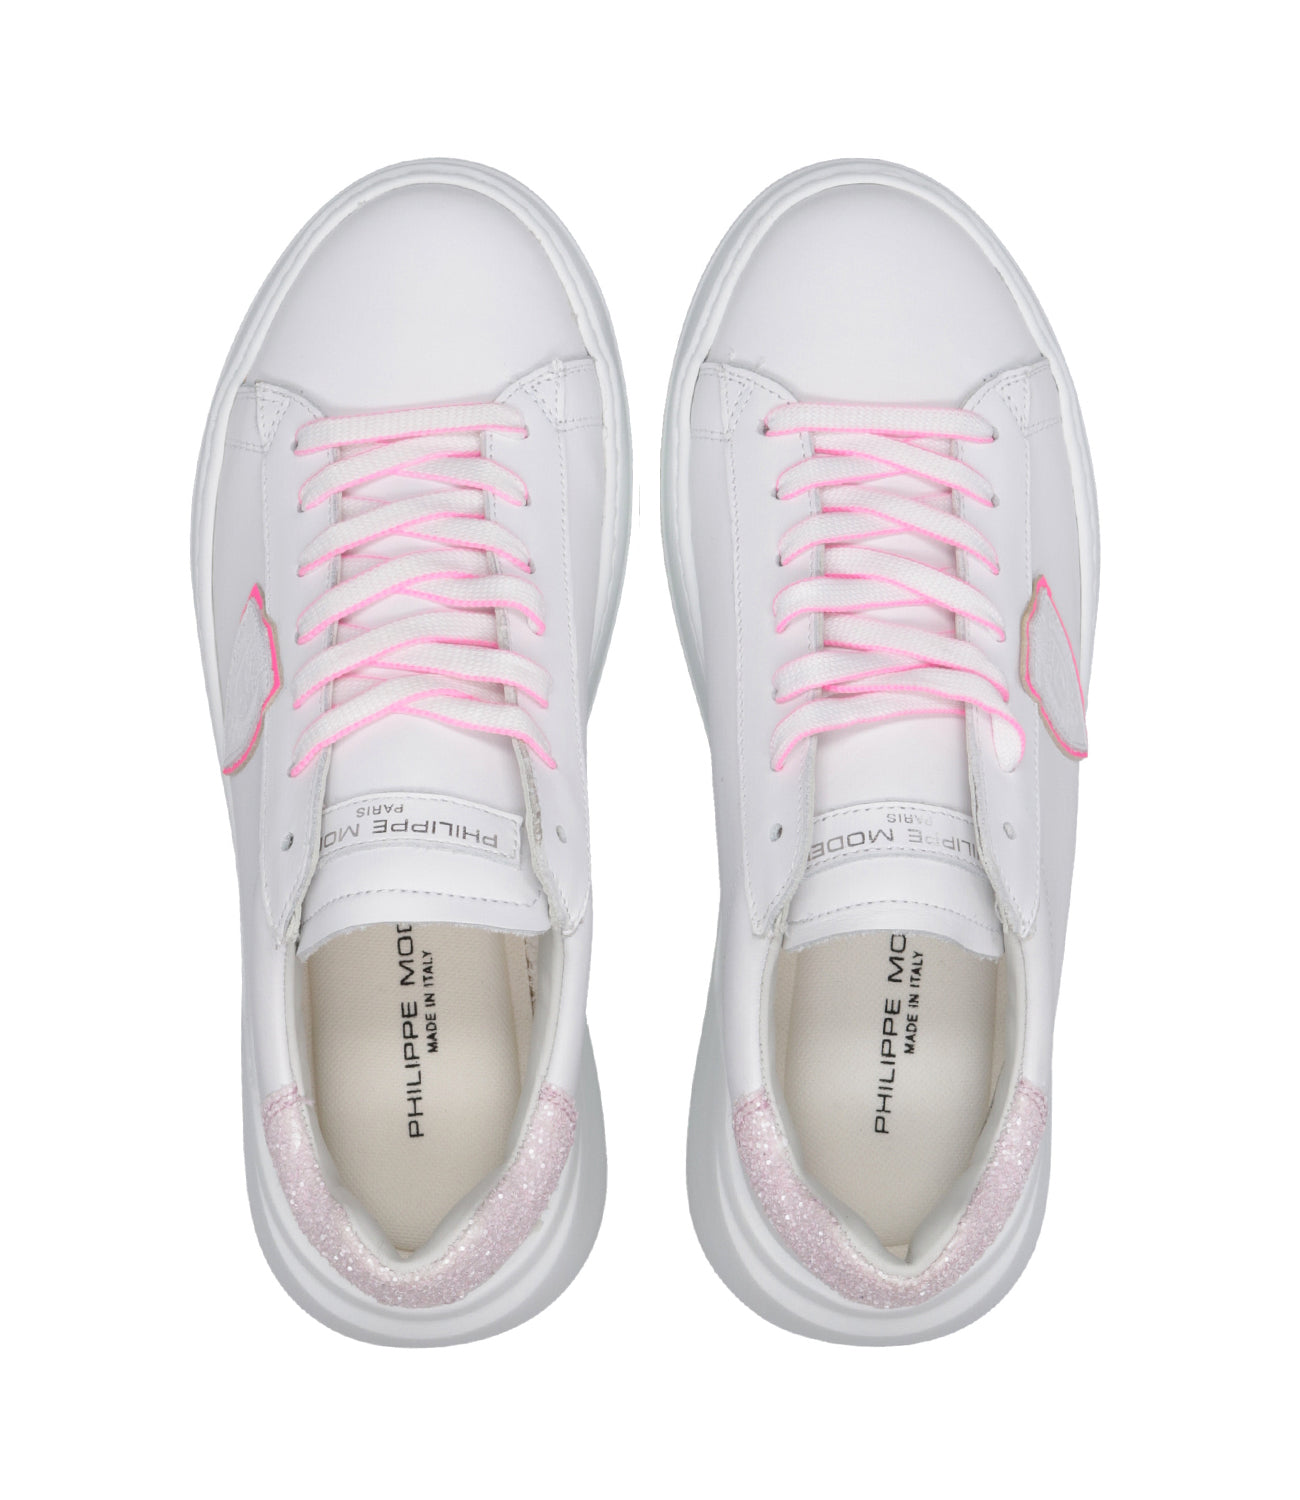 Philippe Model | Sneakers Tres Temple Low Bianco e Fuxia